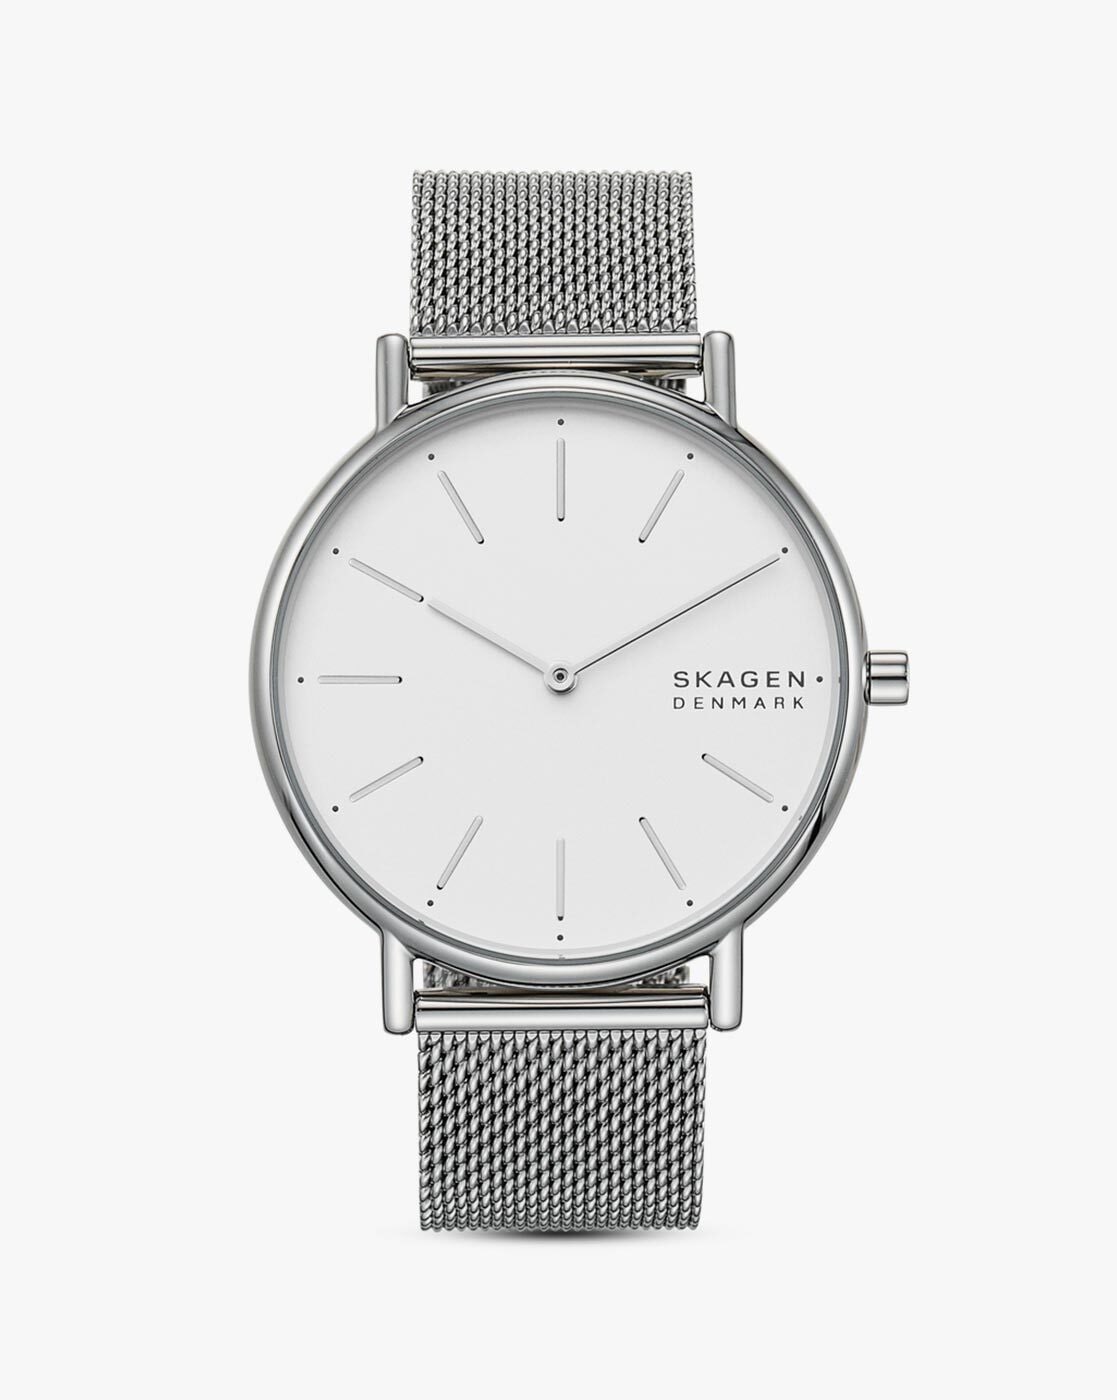 Skagen Falster smartwatch review: Not worth the price